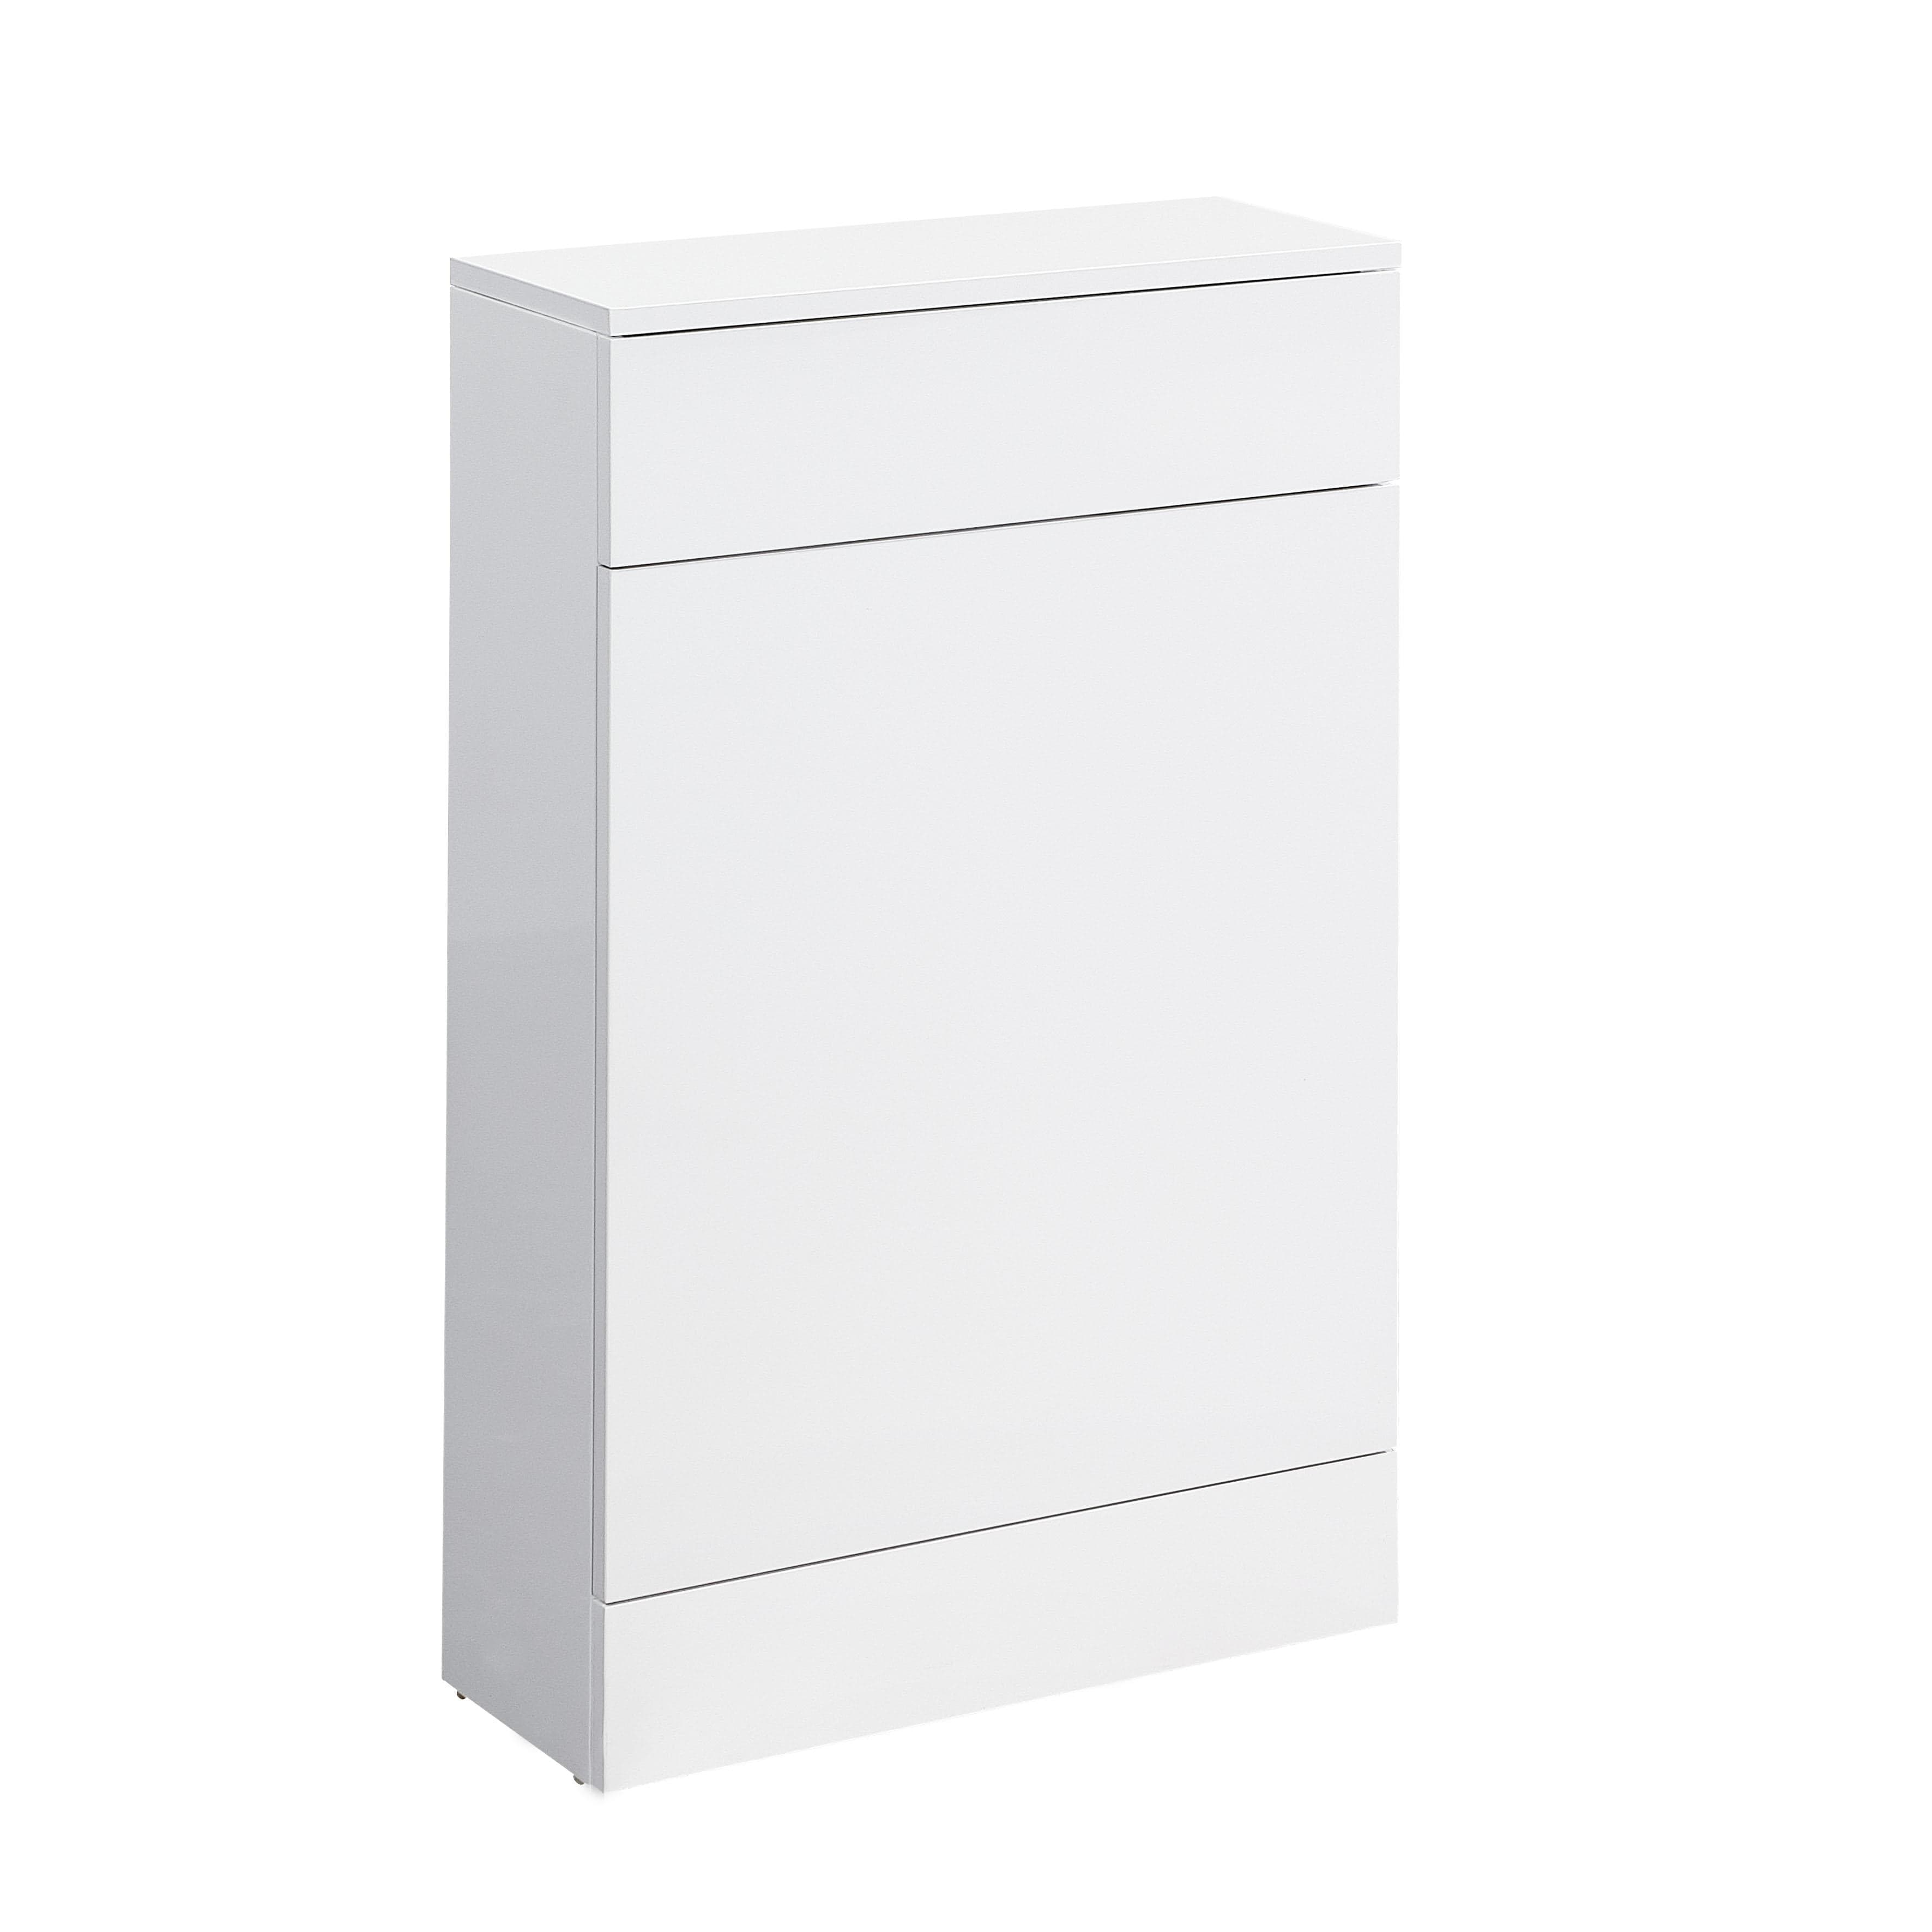 IBathUk Gloss White Back To Wall Concealed Cistern Toilet Bathroom Furniture 500 x 200